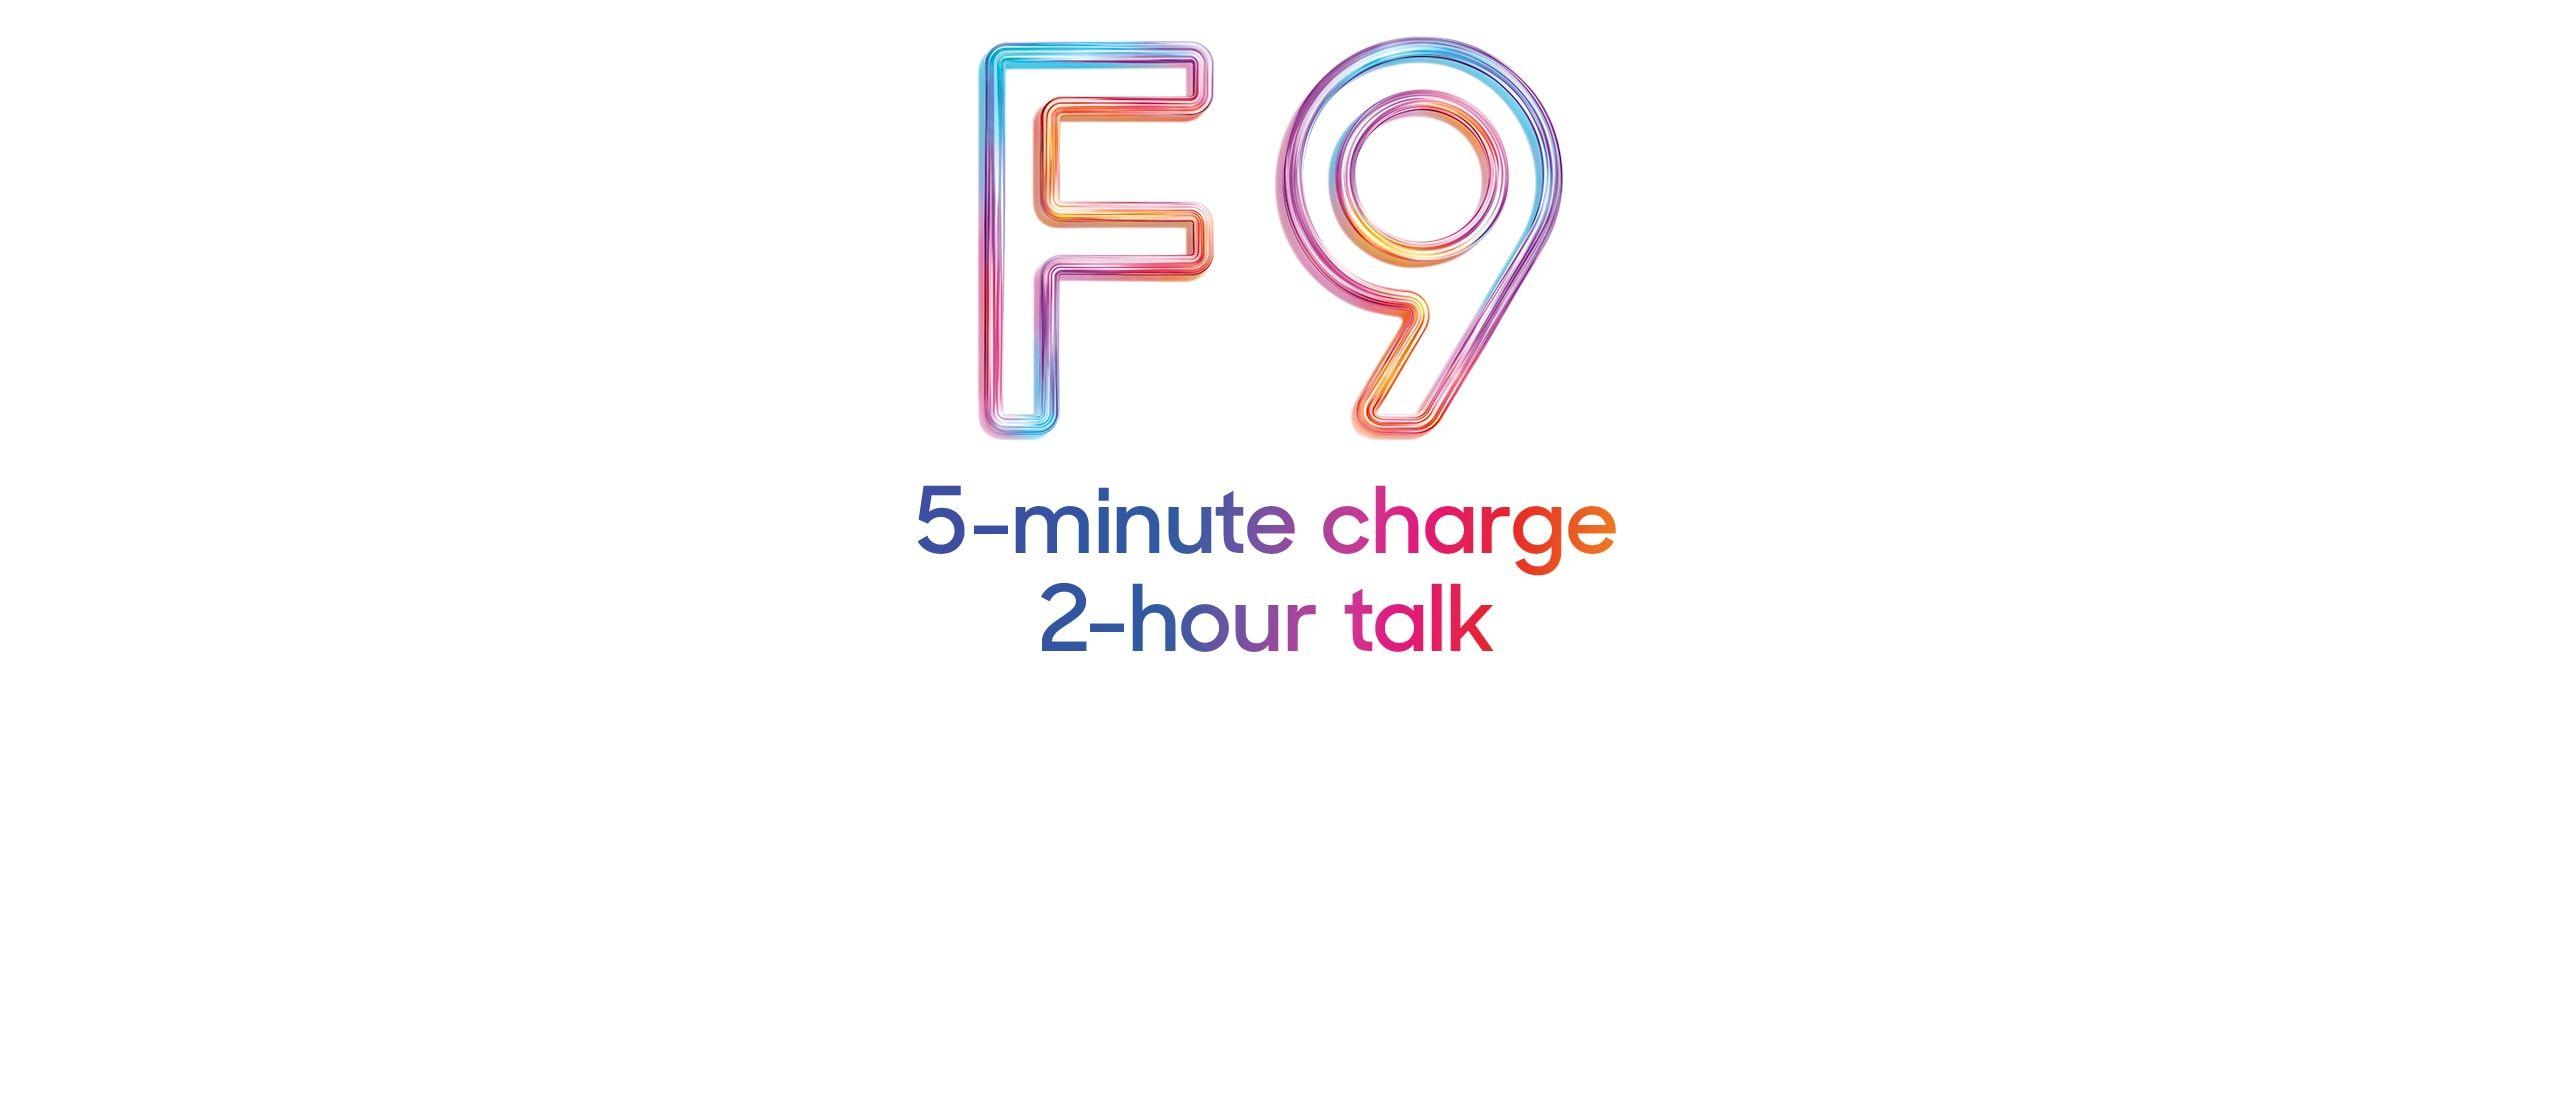 Oppo Phone Camera Logo - OPPO F9 - 5 Minutes Charge for 2 Hours Talk | OPPO Global